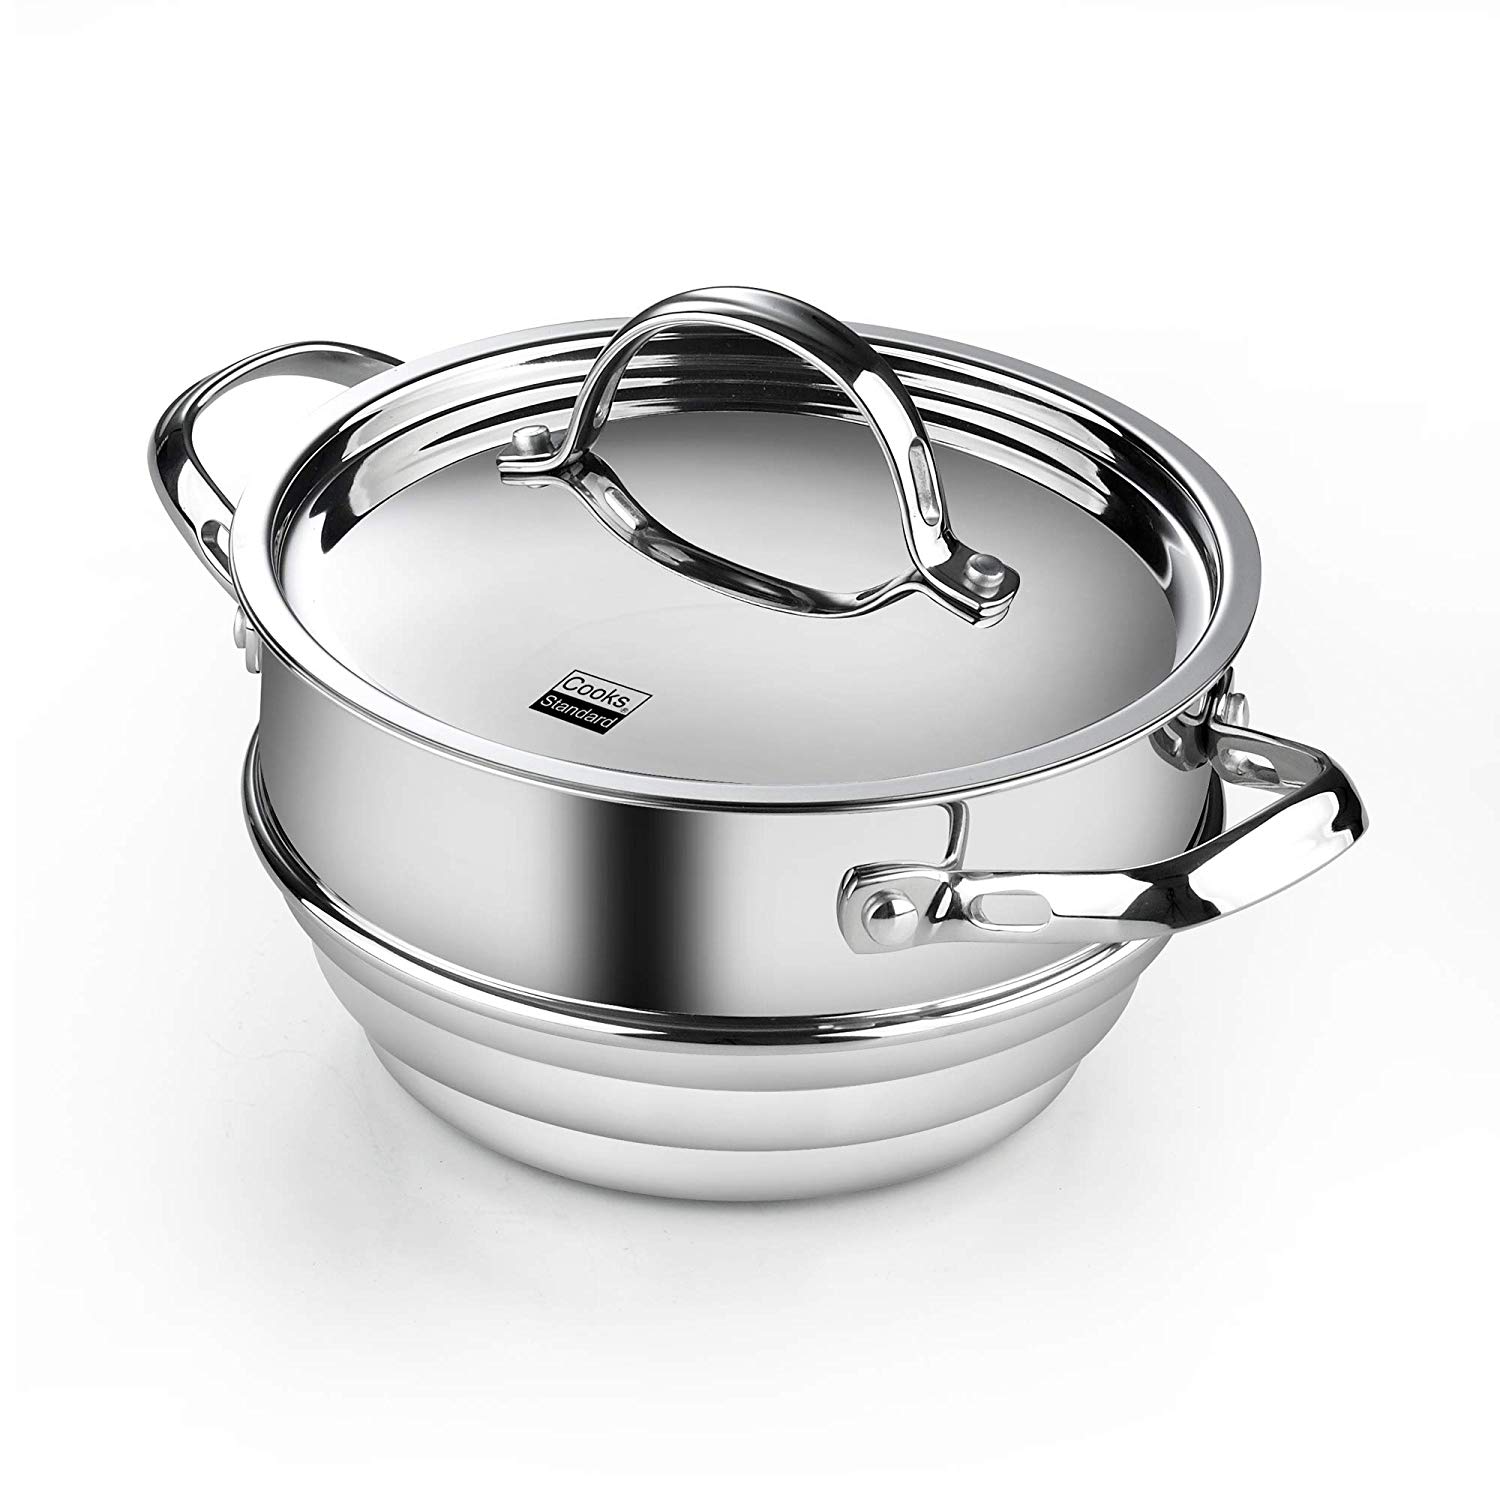 Cooks Standard 02631 Classic 10 Piece Stainless Steel Cookware Set Silver